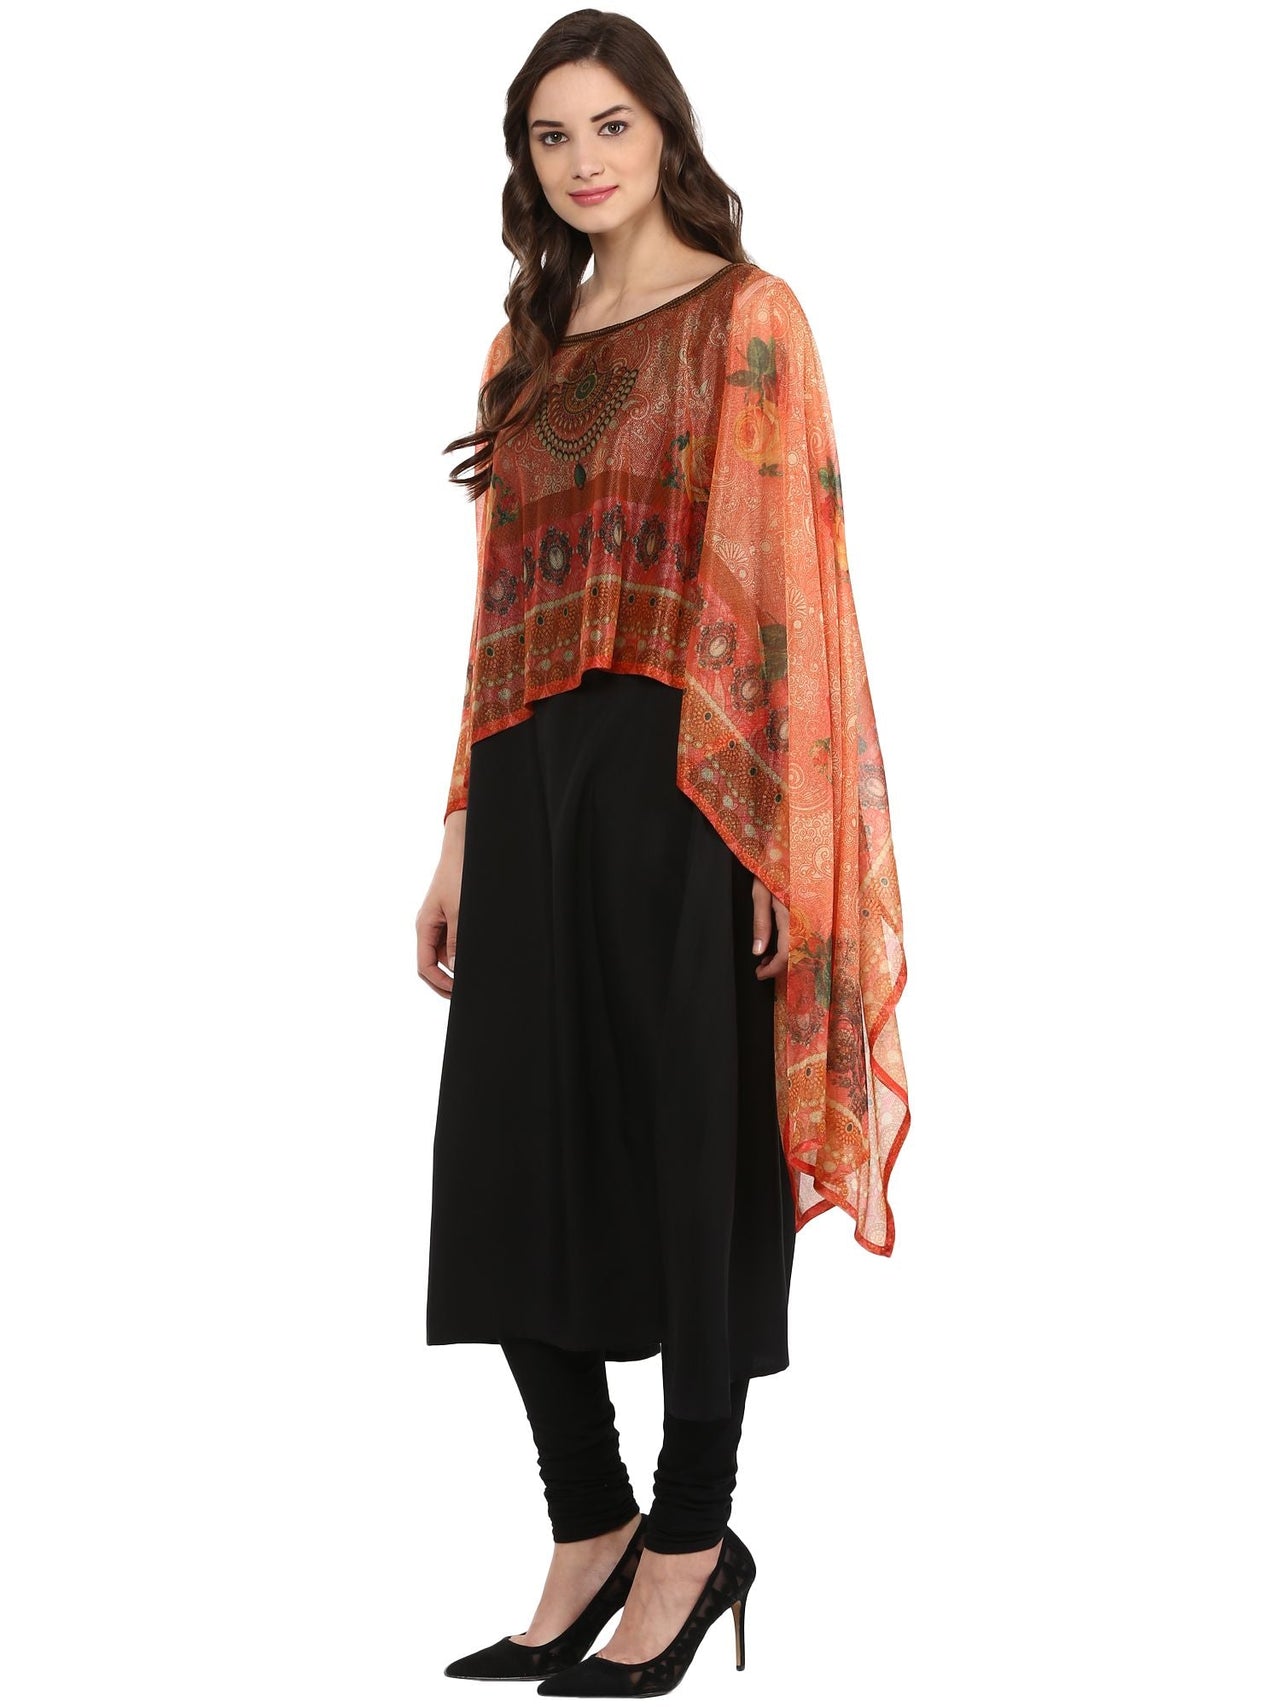 Ahalyaa Black Crepe Printed Kurta With Attached Dupatta For Women